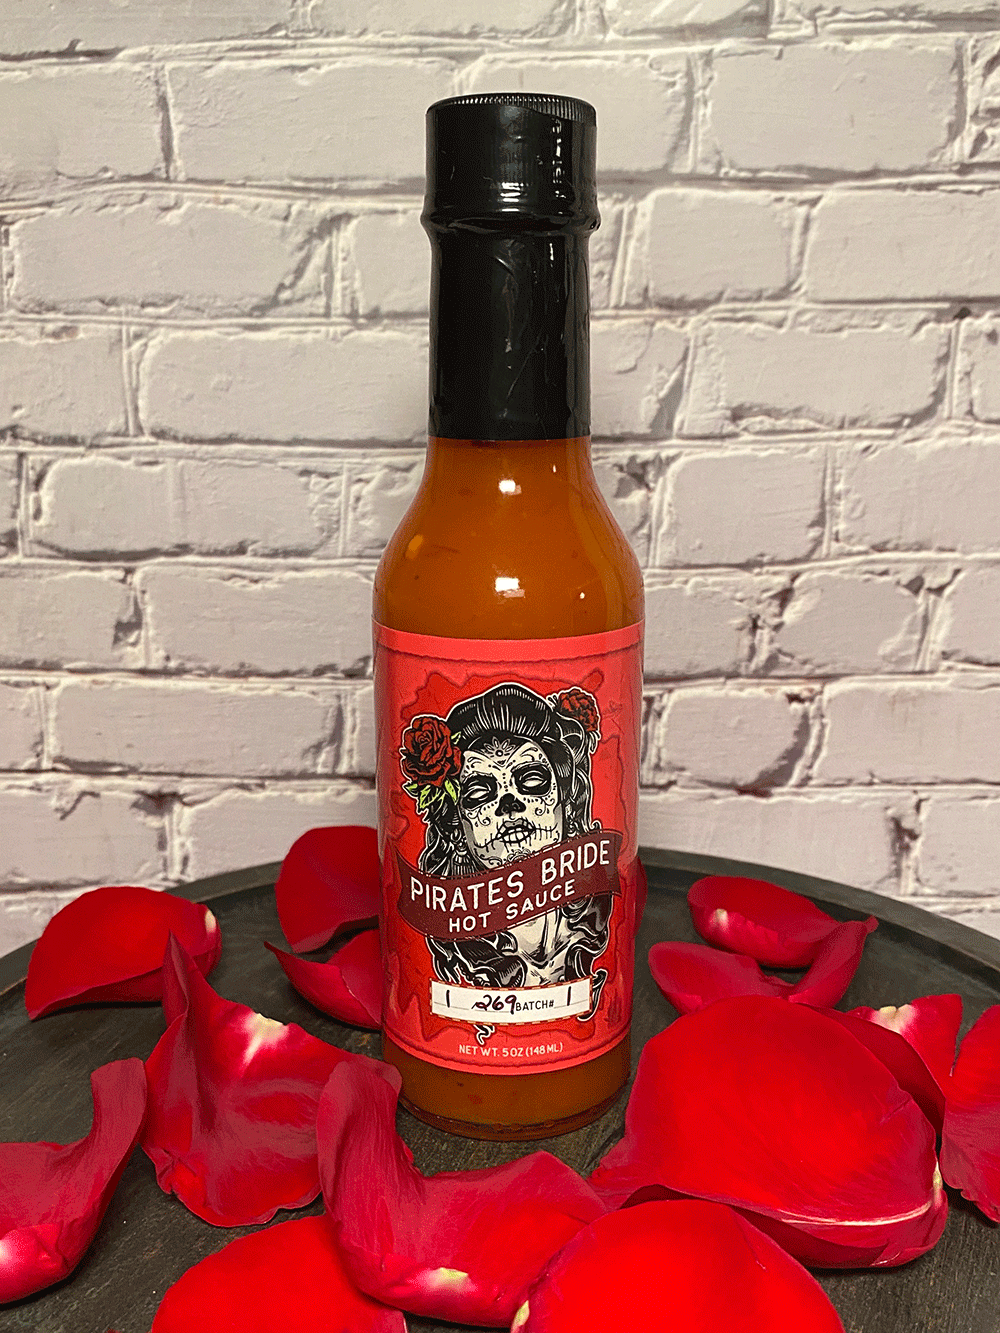 Pirates Bride Hot Sauce – Adventure By Food